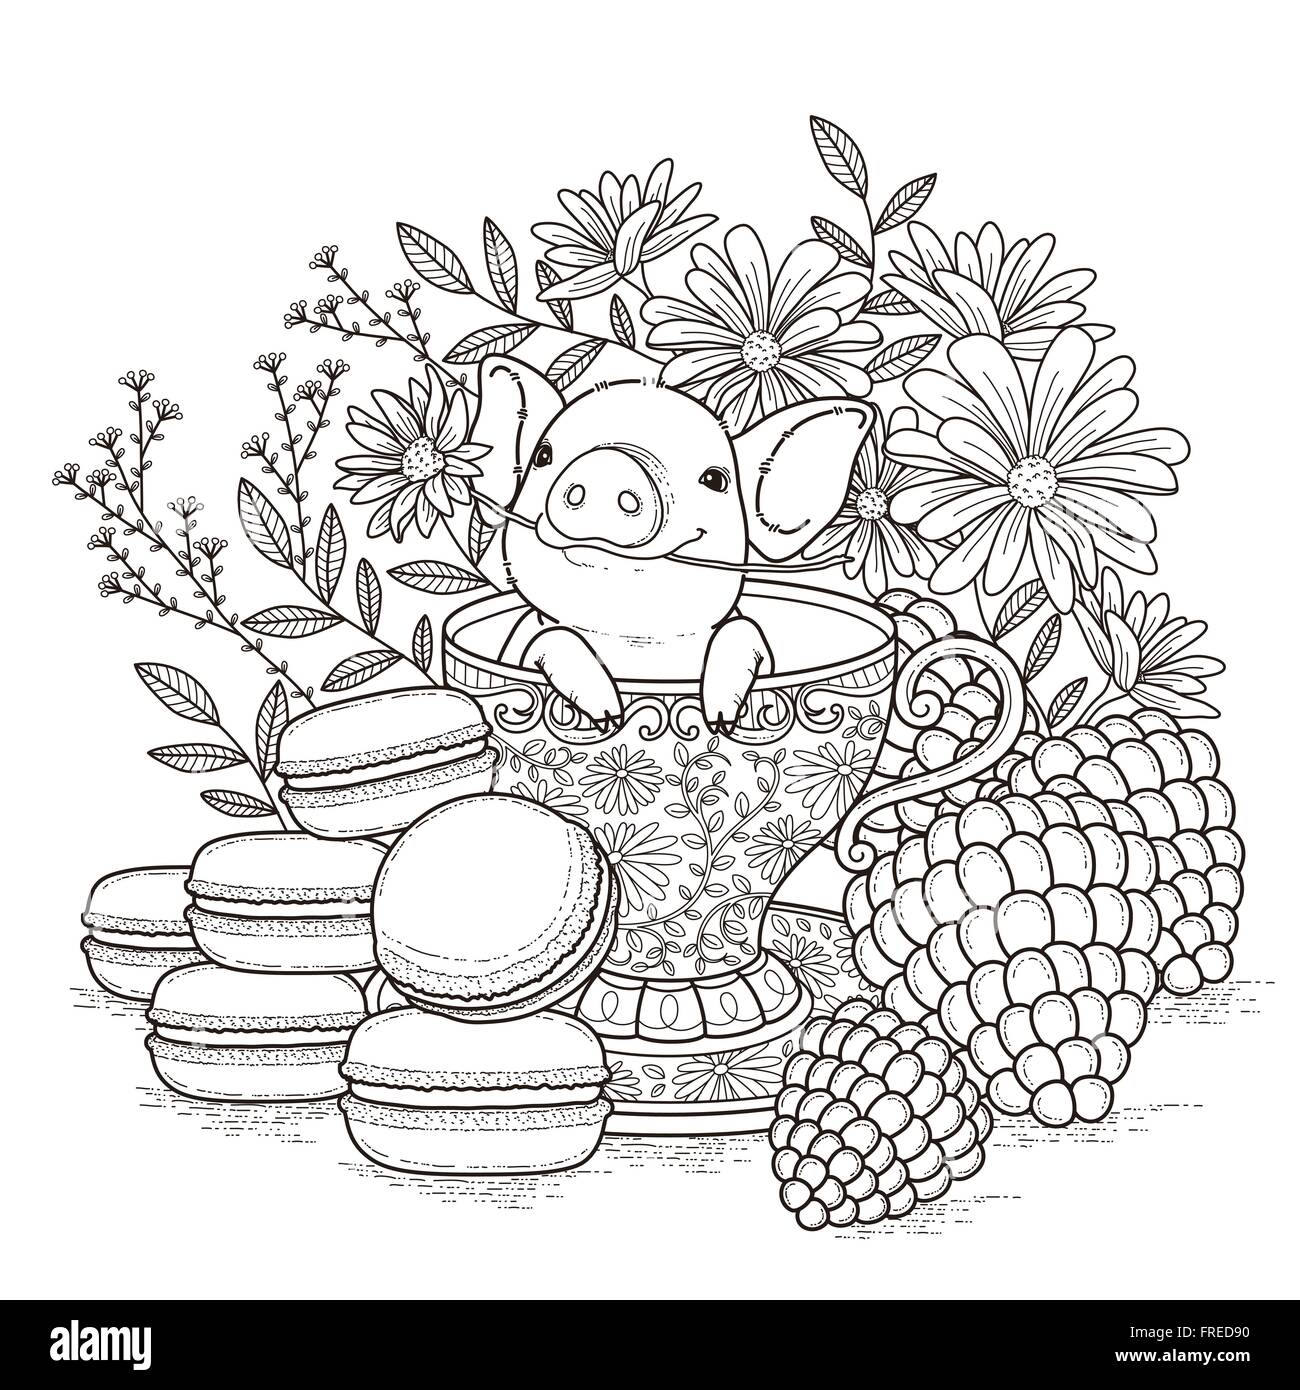 adorable piggy coloring page in exquisite style Stock Vector